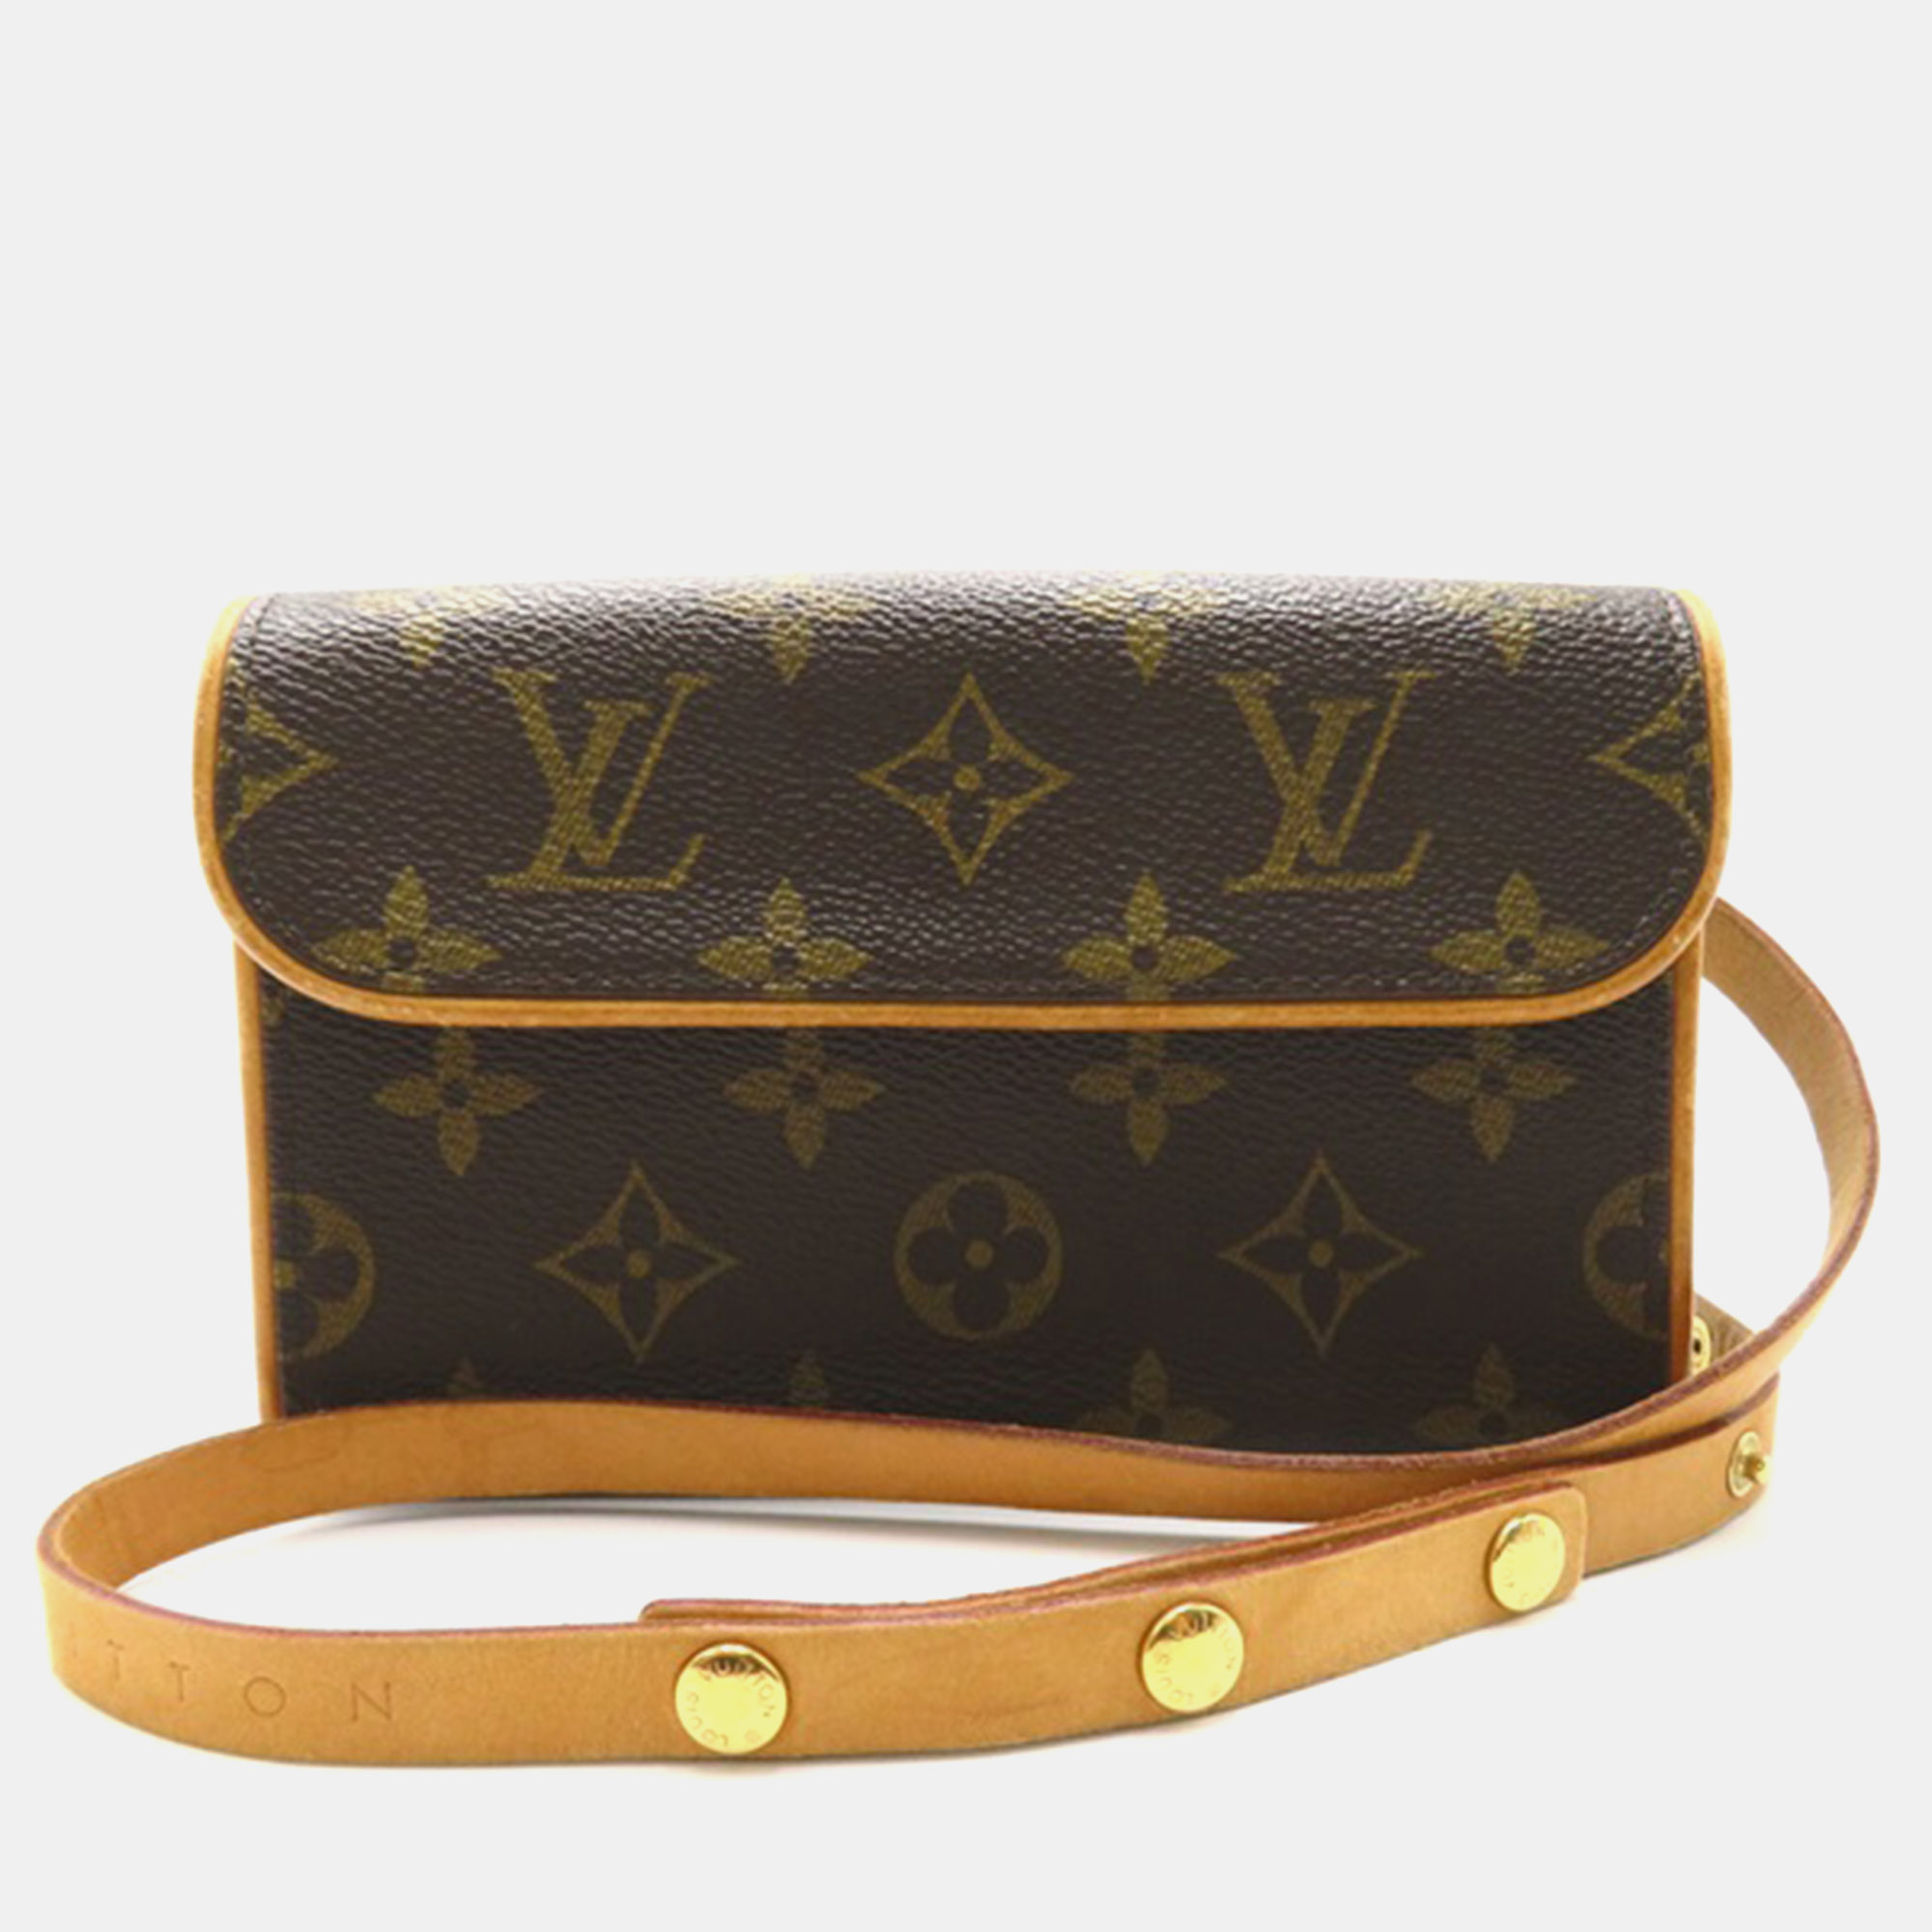 Elevate your accessory game with this Louis Vuitton belt bag a fusion of fashion and functionality. Crafted from luxurious materials it offers hands free elegance and effortless style for todays on the go trendsetter.